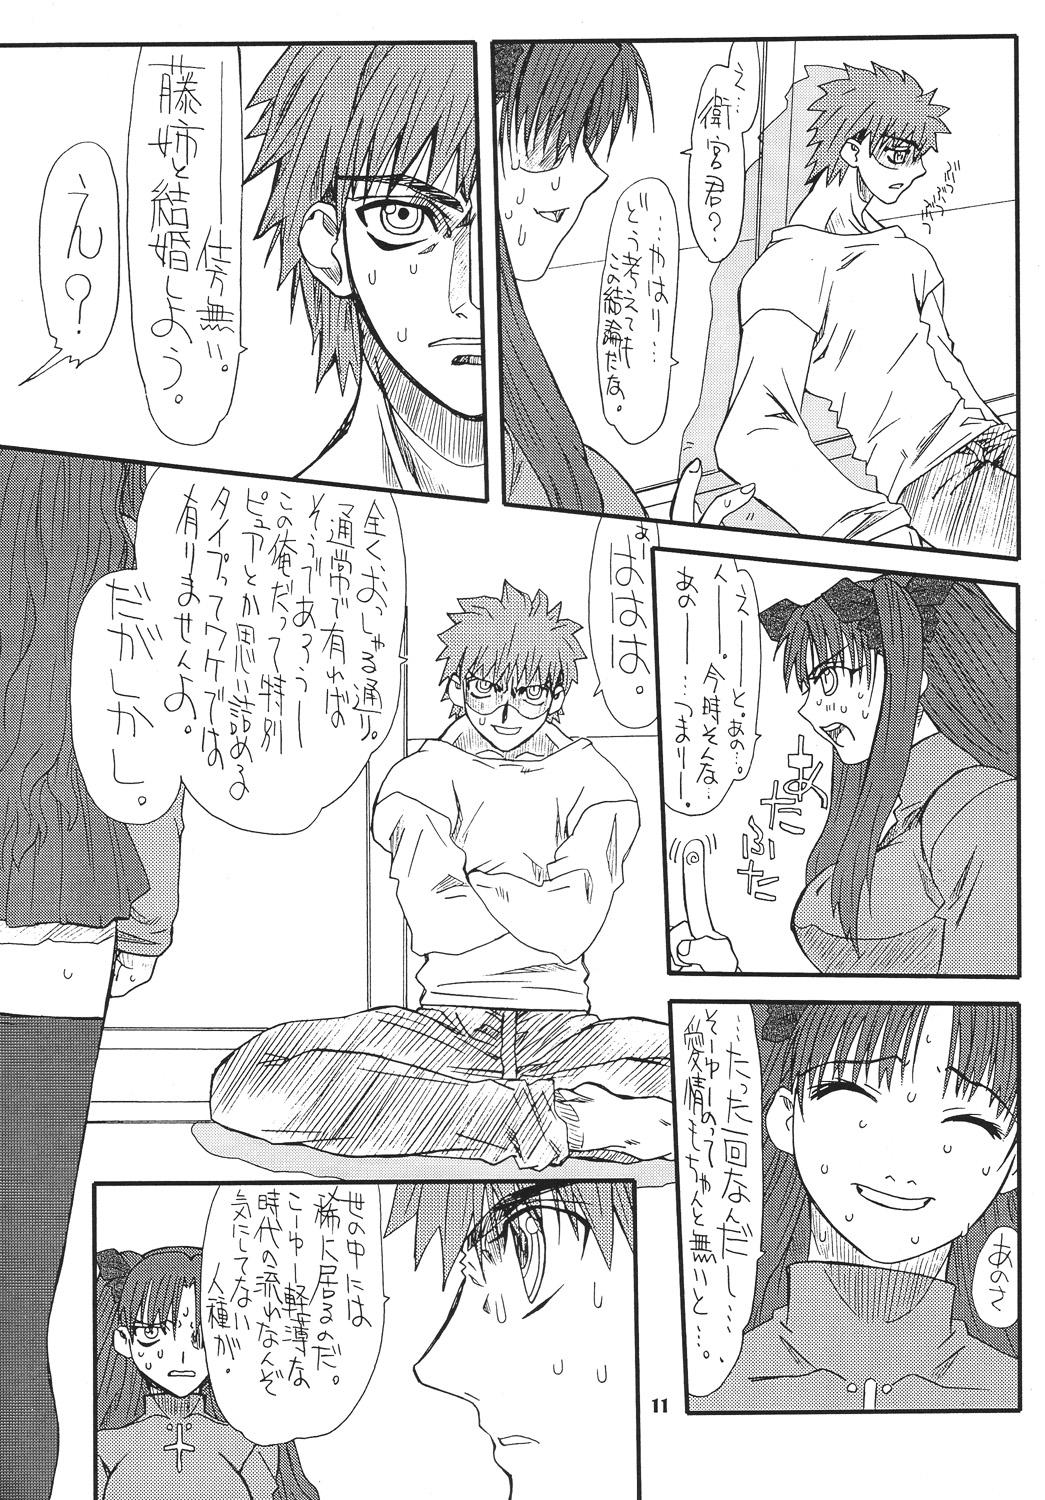 Black Akihime San - Fate stay night Clip - Page 11